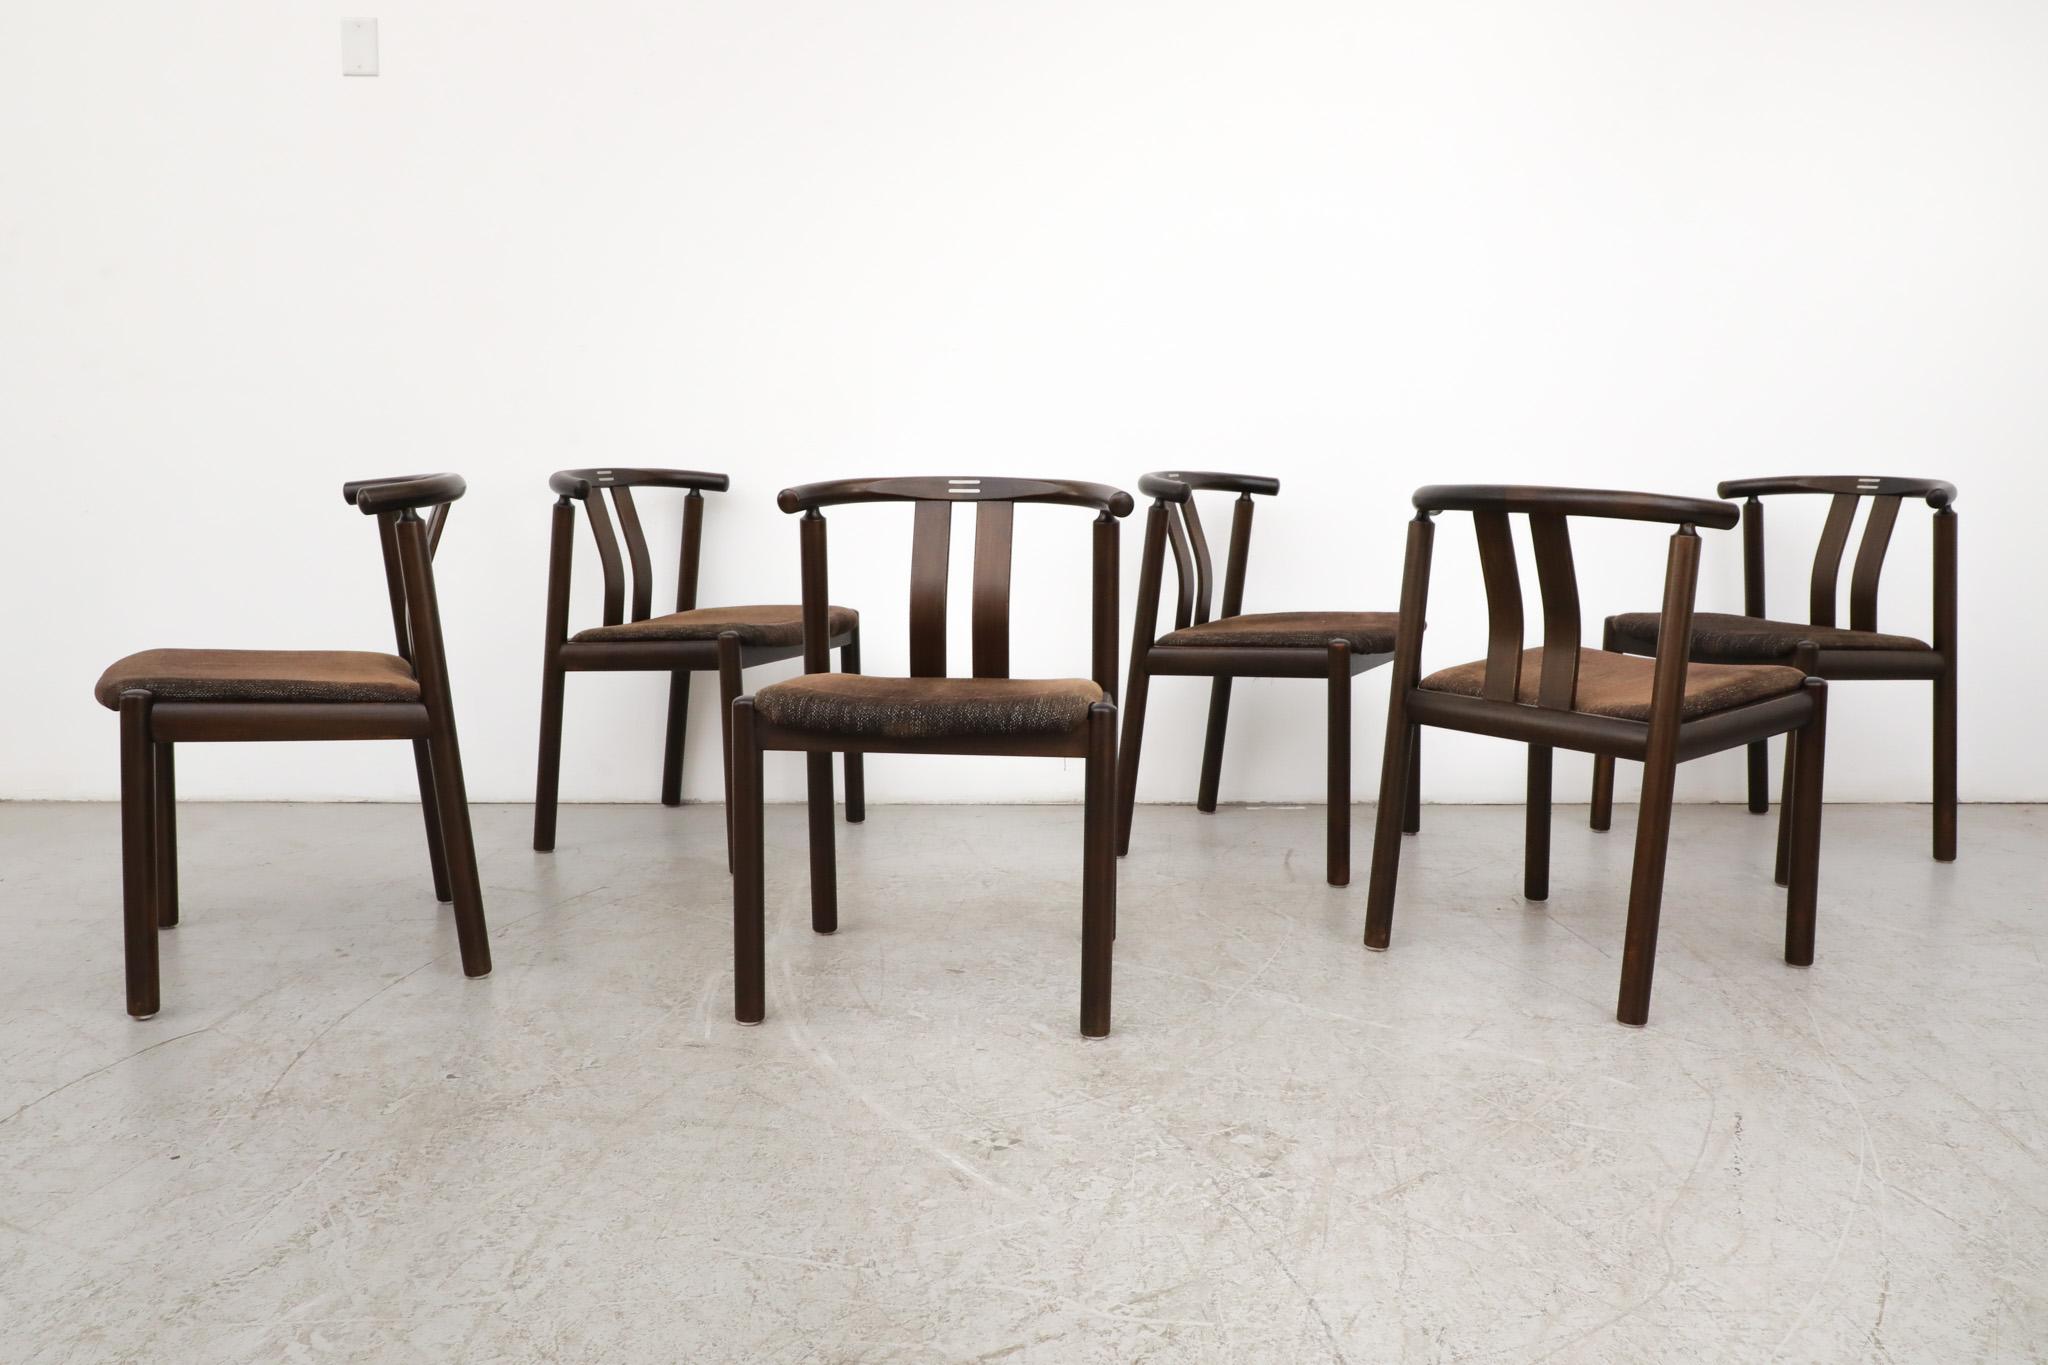 Set of 6 'Cleopatra' dining chairs by Hans J. Frydendal for Boltinge. Beautiful vintage set with dark stained bentwood frames and upholstered seats. In original condition with some visible wear consistent with their age and use. Matching oval dining